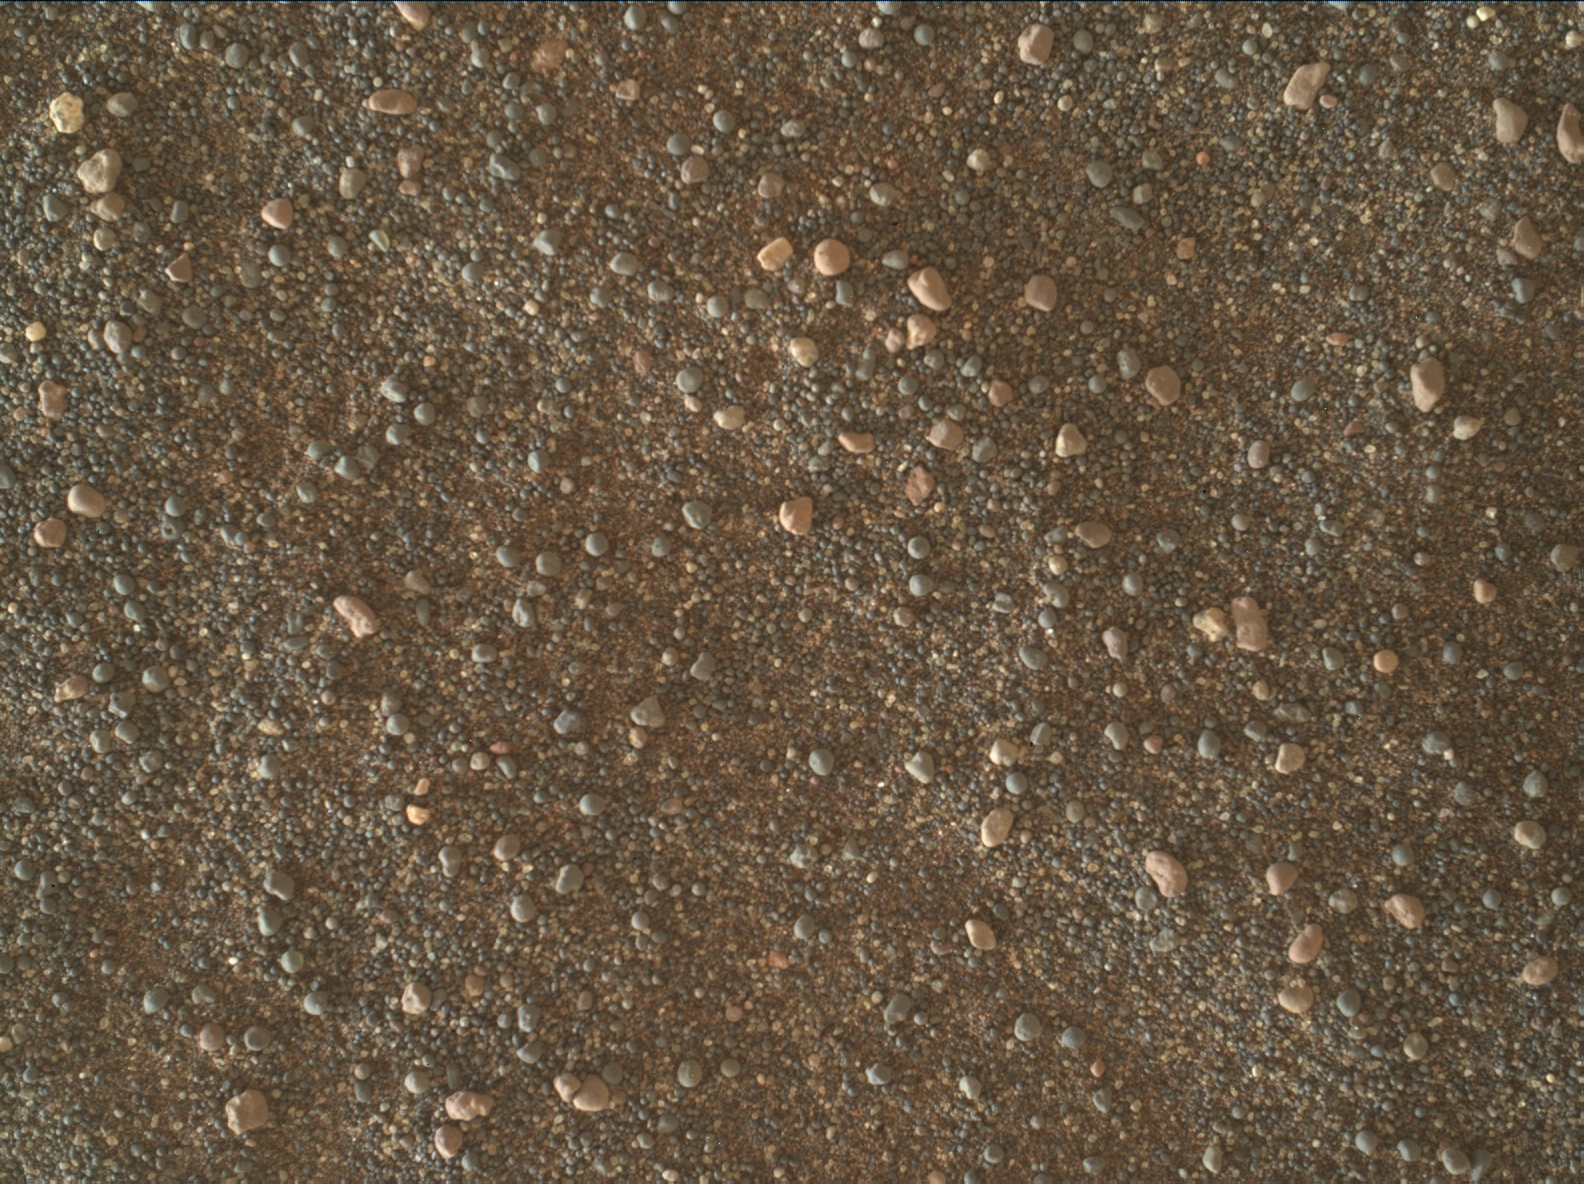 Nasa's Mars rover Curiosity acquired this image using its Mars Hand Lens Imager (MAHLI) on Sol 2989